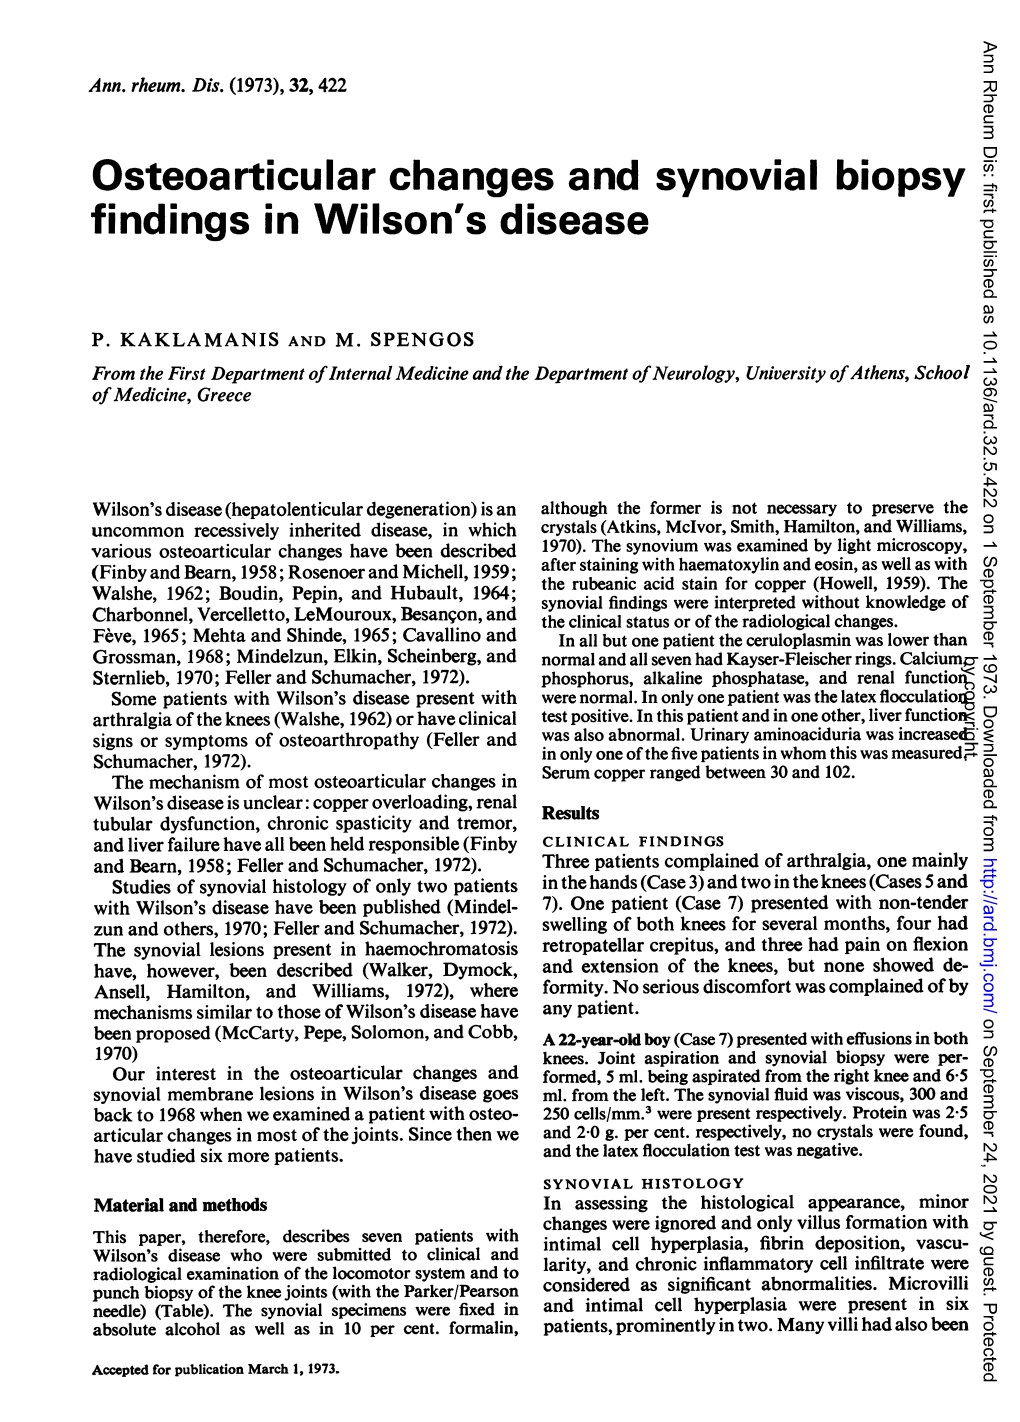 Osteoarticular Changes and Synovial Biopsy Findings in Wilson's Disease